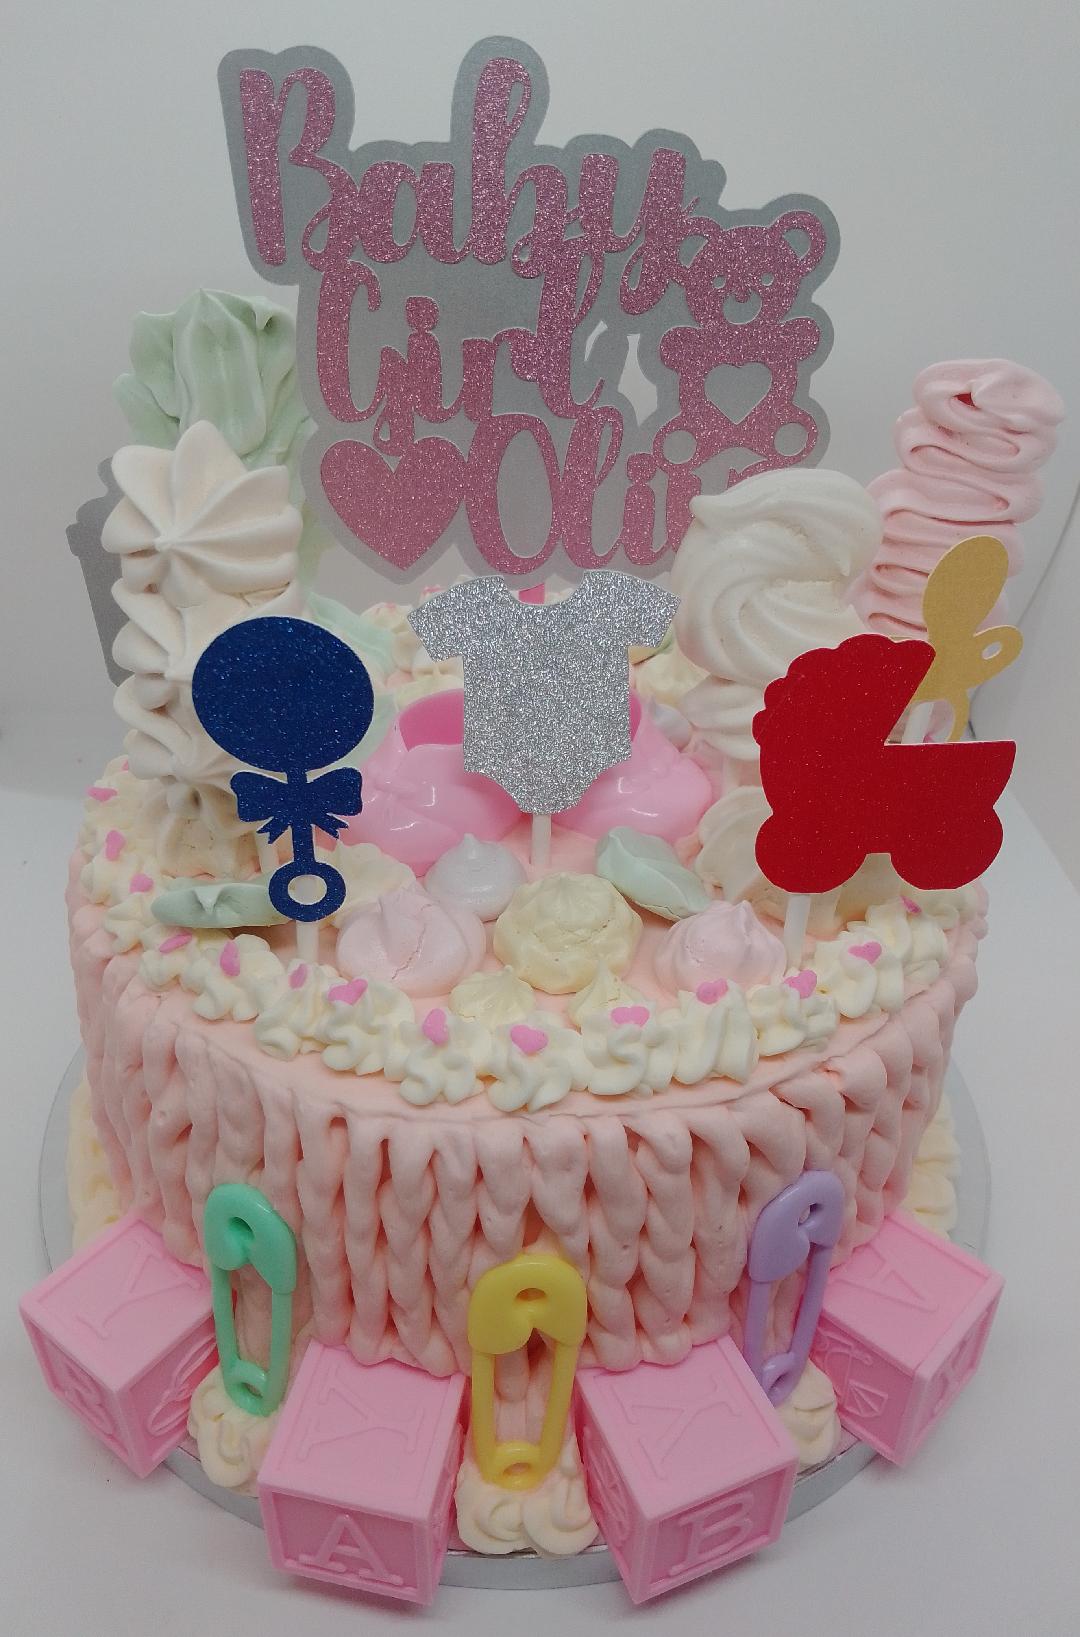 12" 3-Layer Baby Shower Cake (local delivery and pick-up – Nancy's Bake Shop